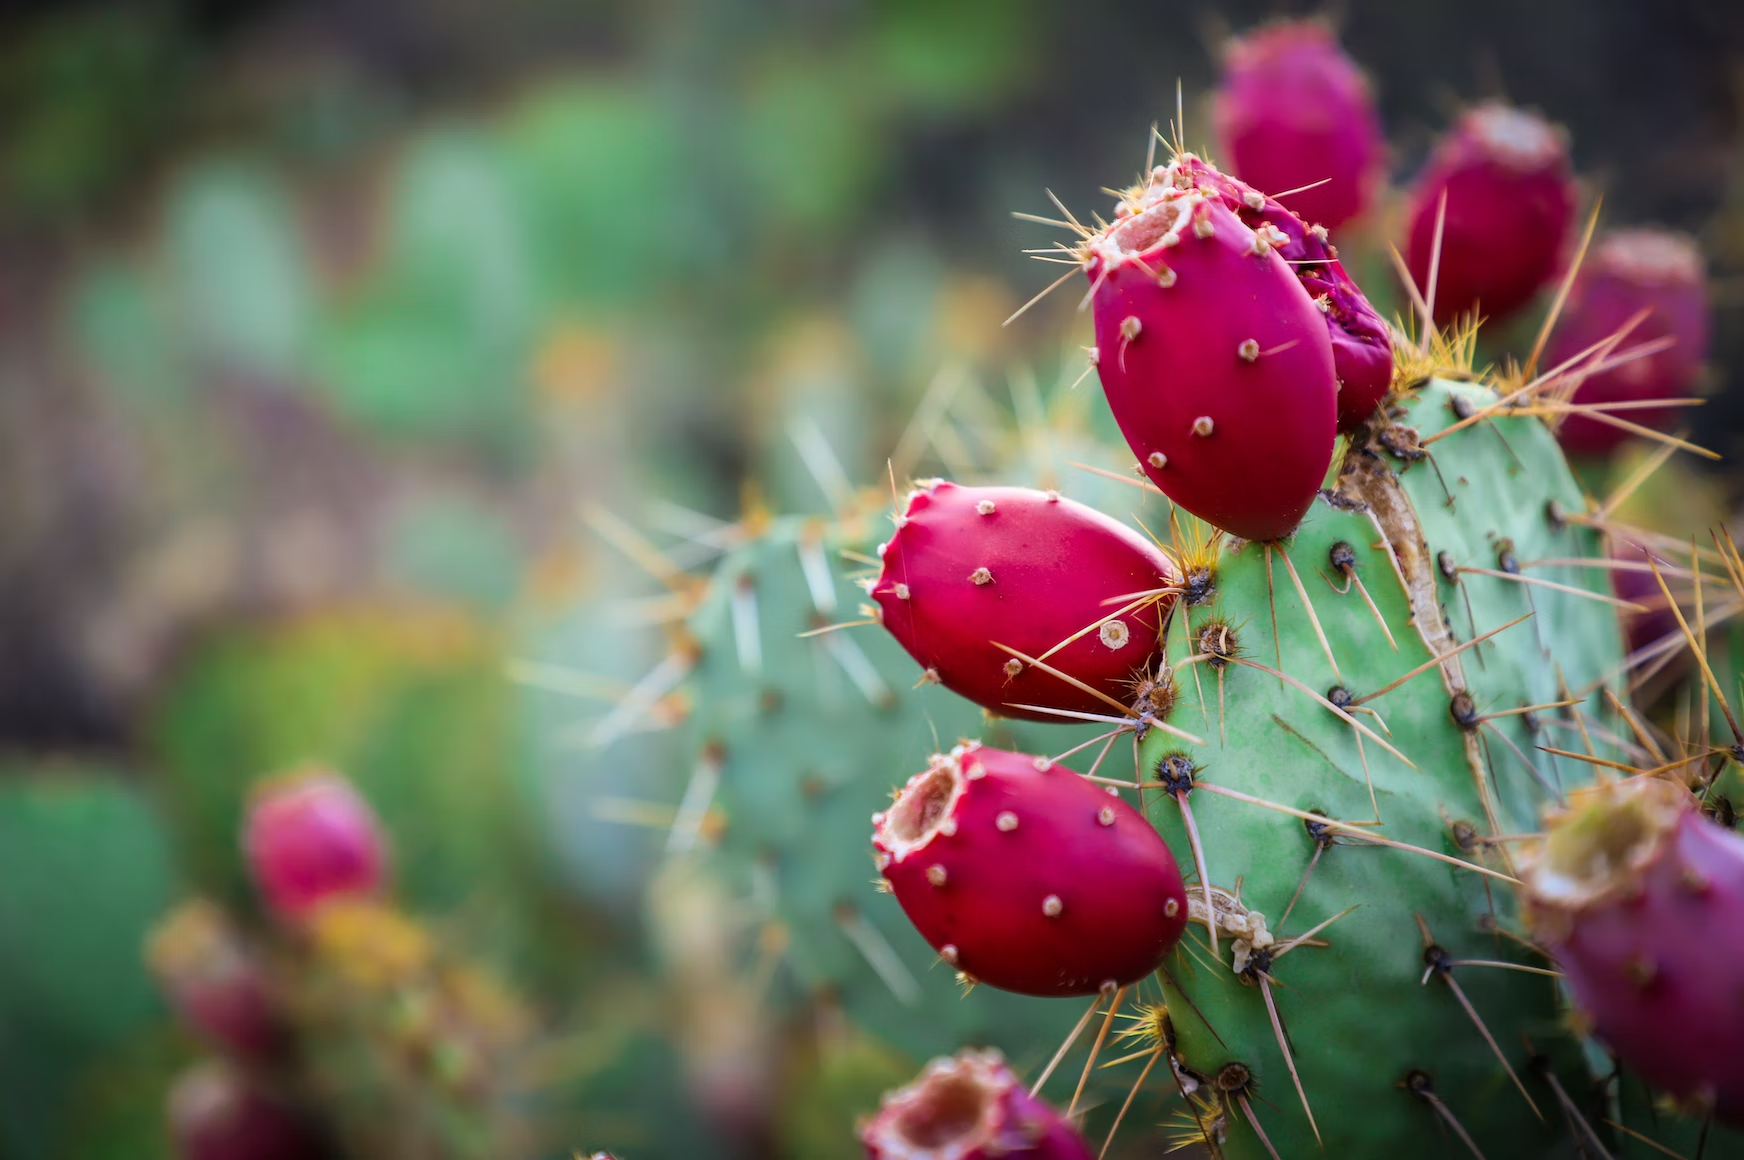 Rising star on our list of ingredients: the prickly pear.